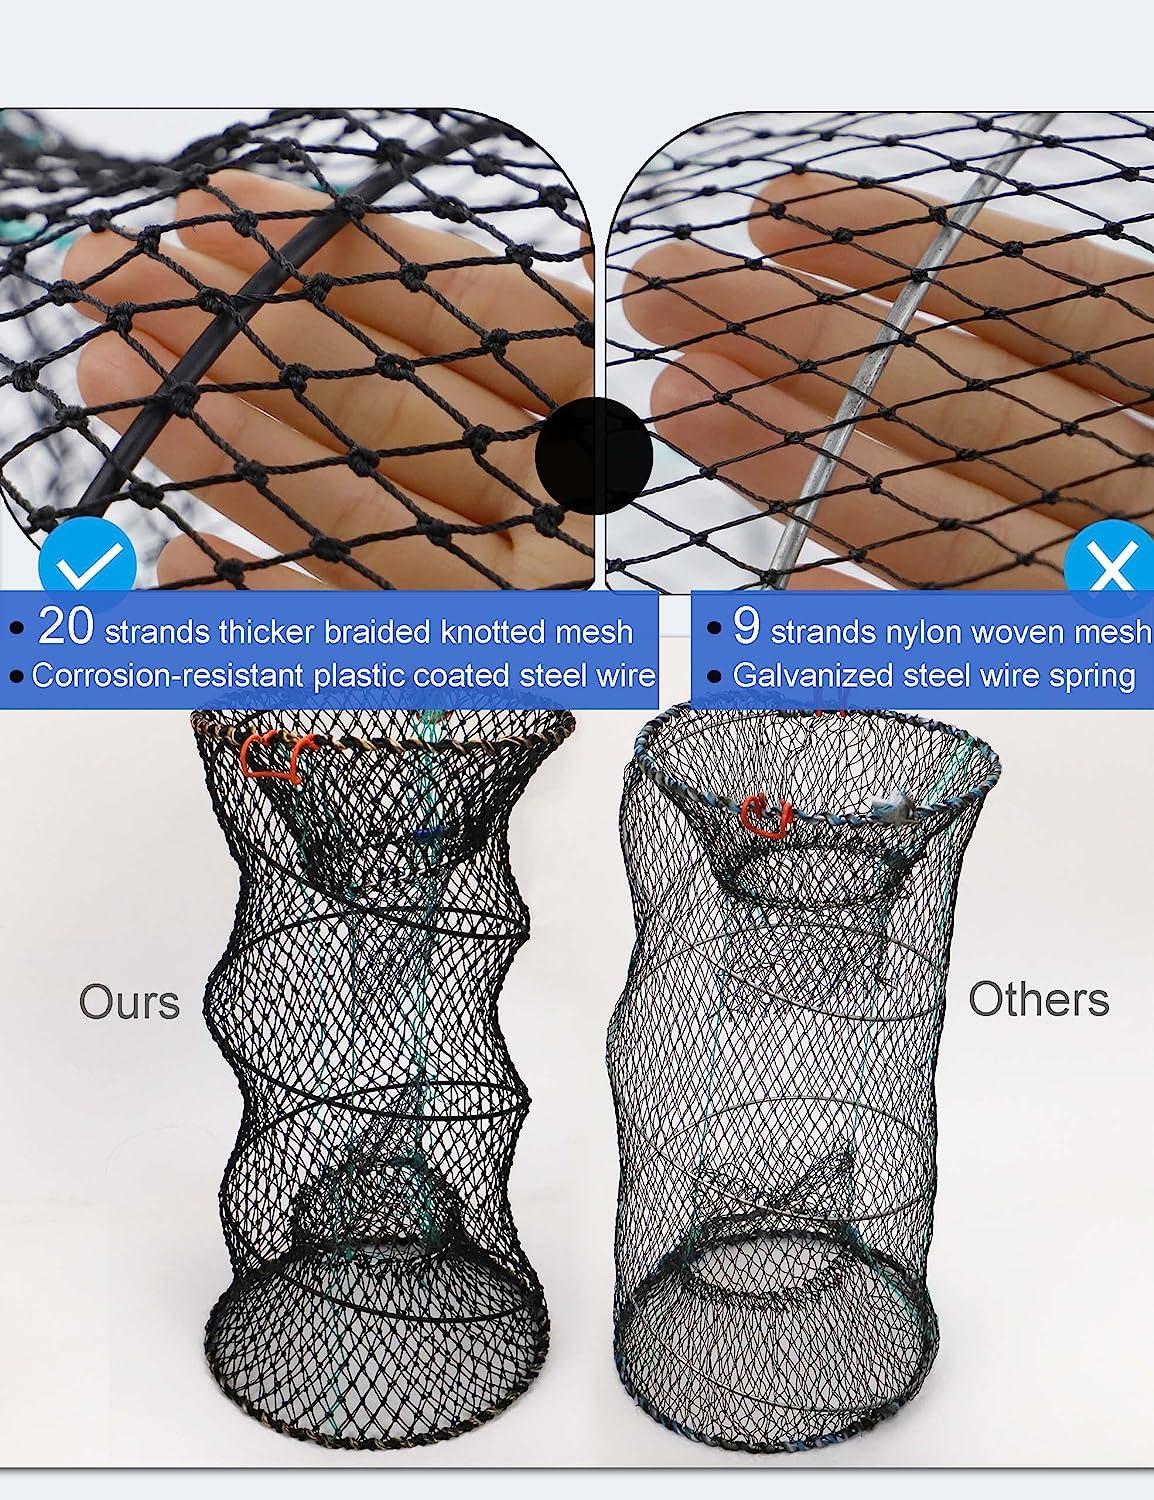 Hlotmeky Crab Trap Minnow Trap Fishing Bait Traps with 10m Hand Rope,  Folded Lobster Crawfish Fishing Net Trap